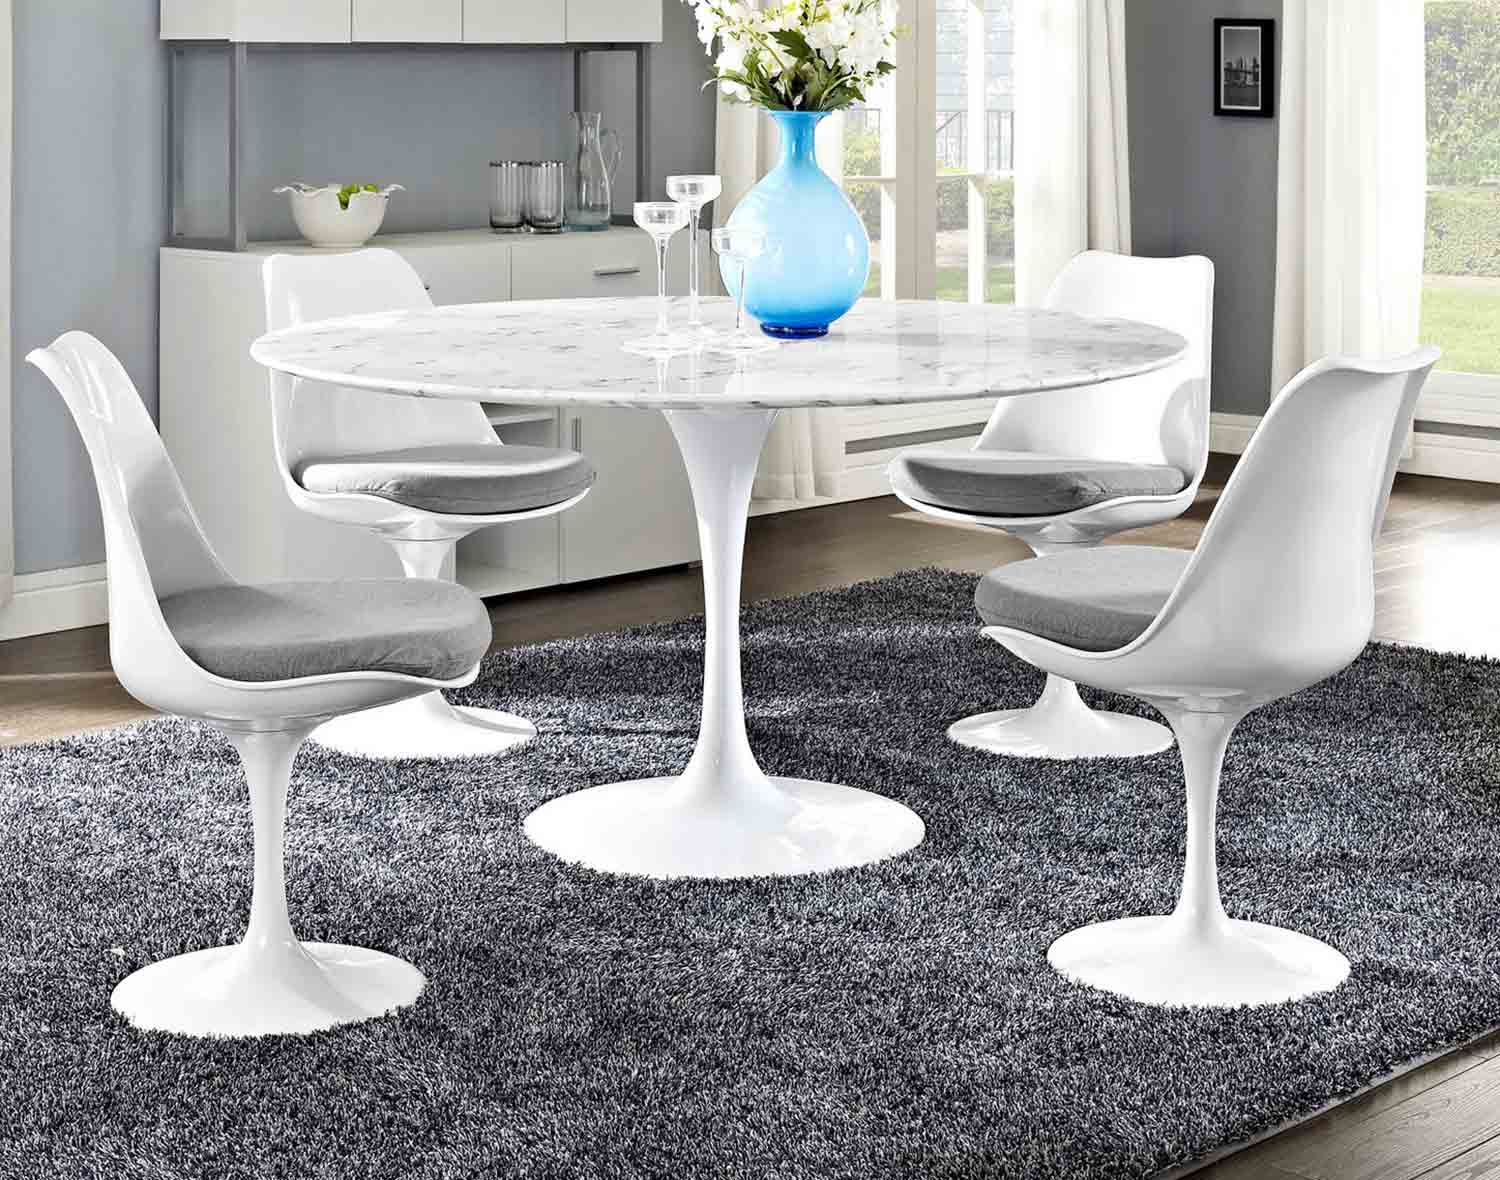 Modway Lippa 54 Artificial Marble Dining Table - White